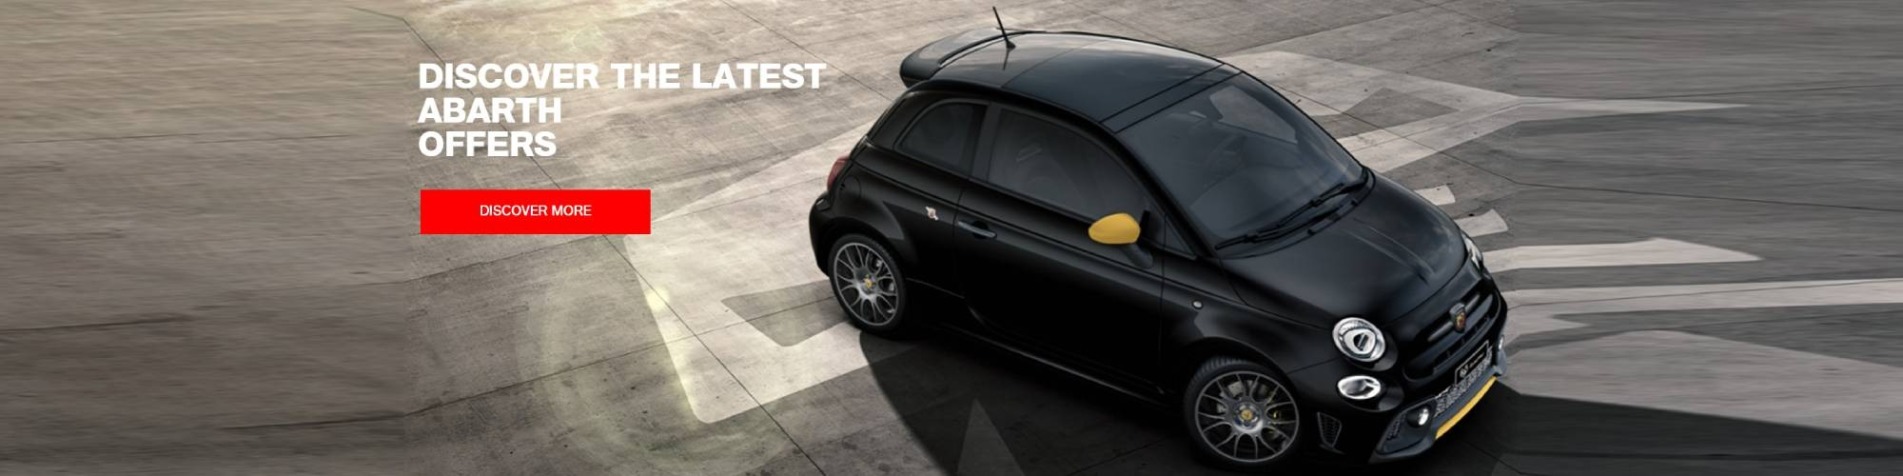 Discover Abarth Offers